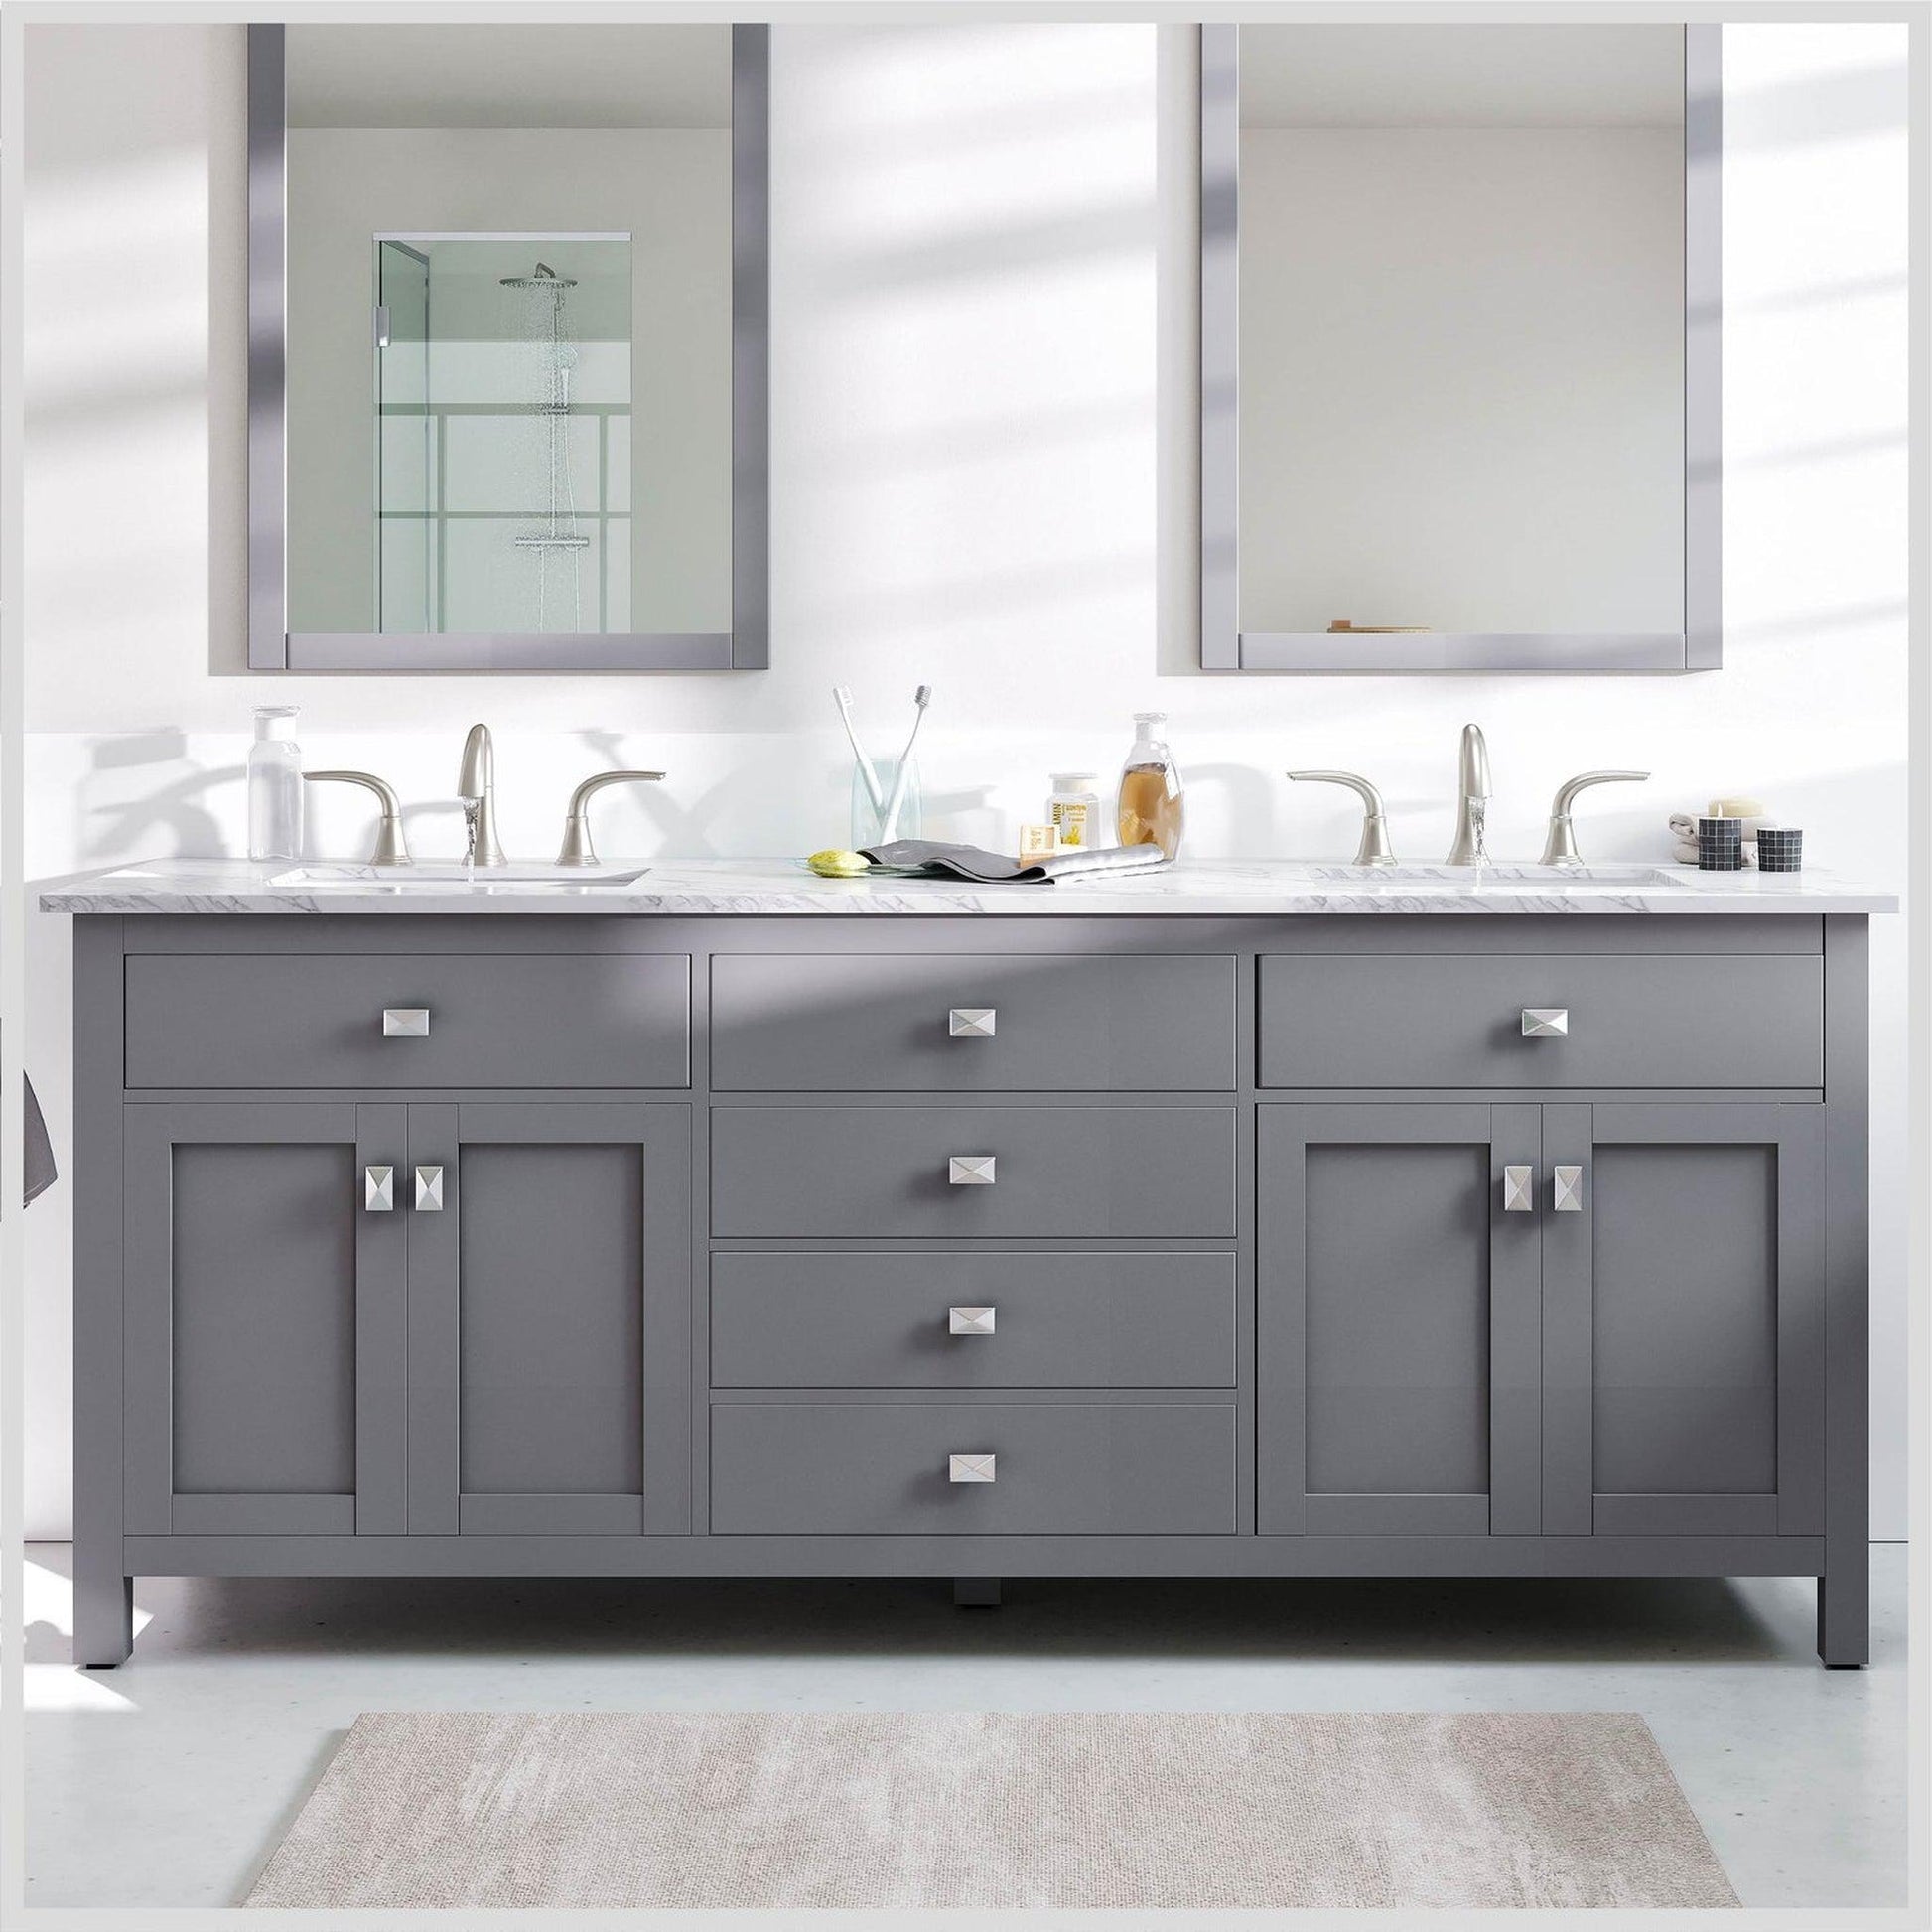 Eviva Totti Artemis 72" x 34" Gray Freestanding Bathroom Vanity With Carrara Style Man-made Stone Countertop and Double Undermount Sink